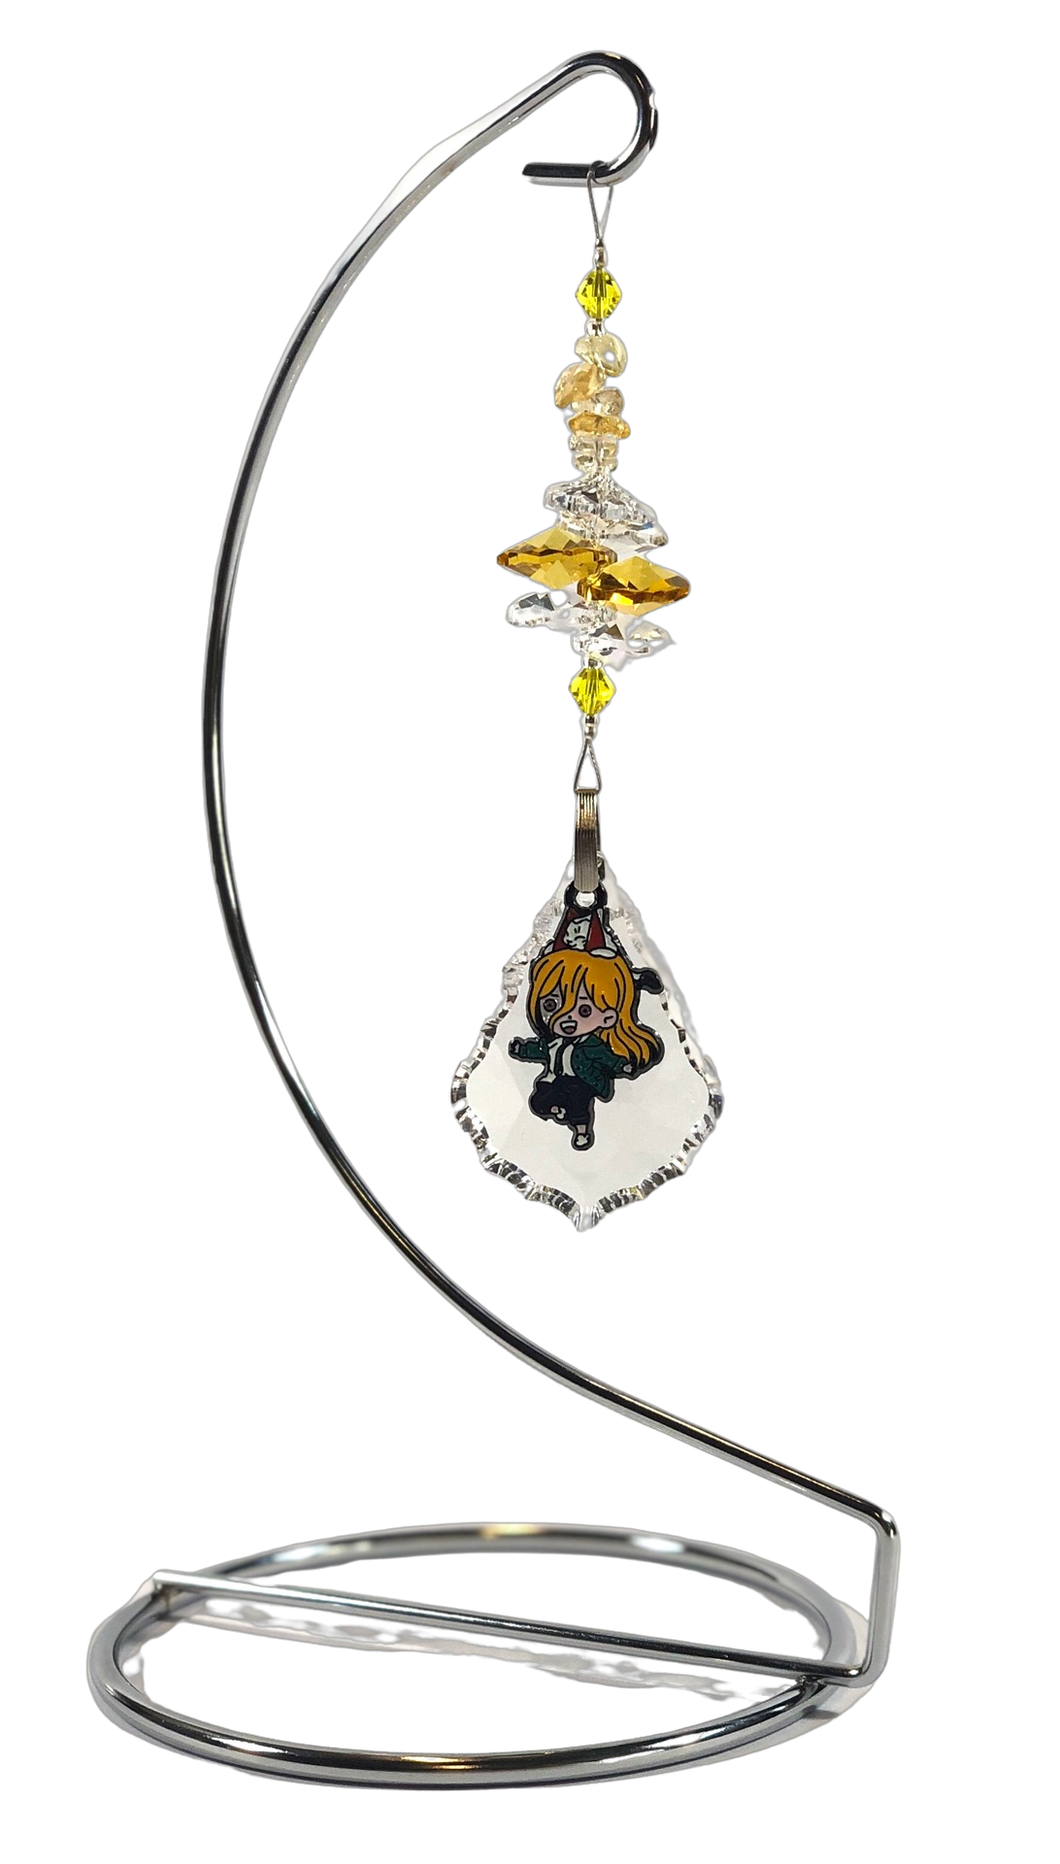 Chainsaw Man - Power crystal suncatcher is decorated with citrine gemstones and come on this amazing stand.